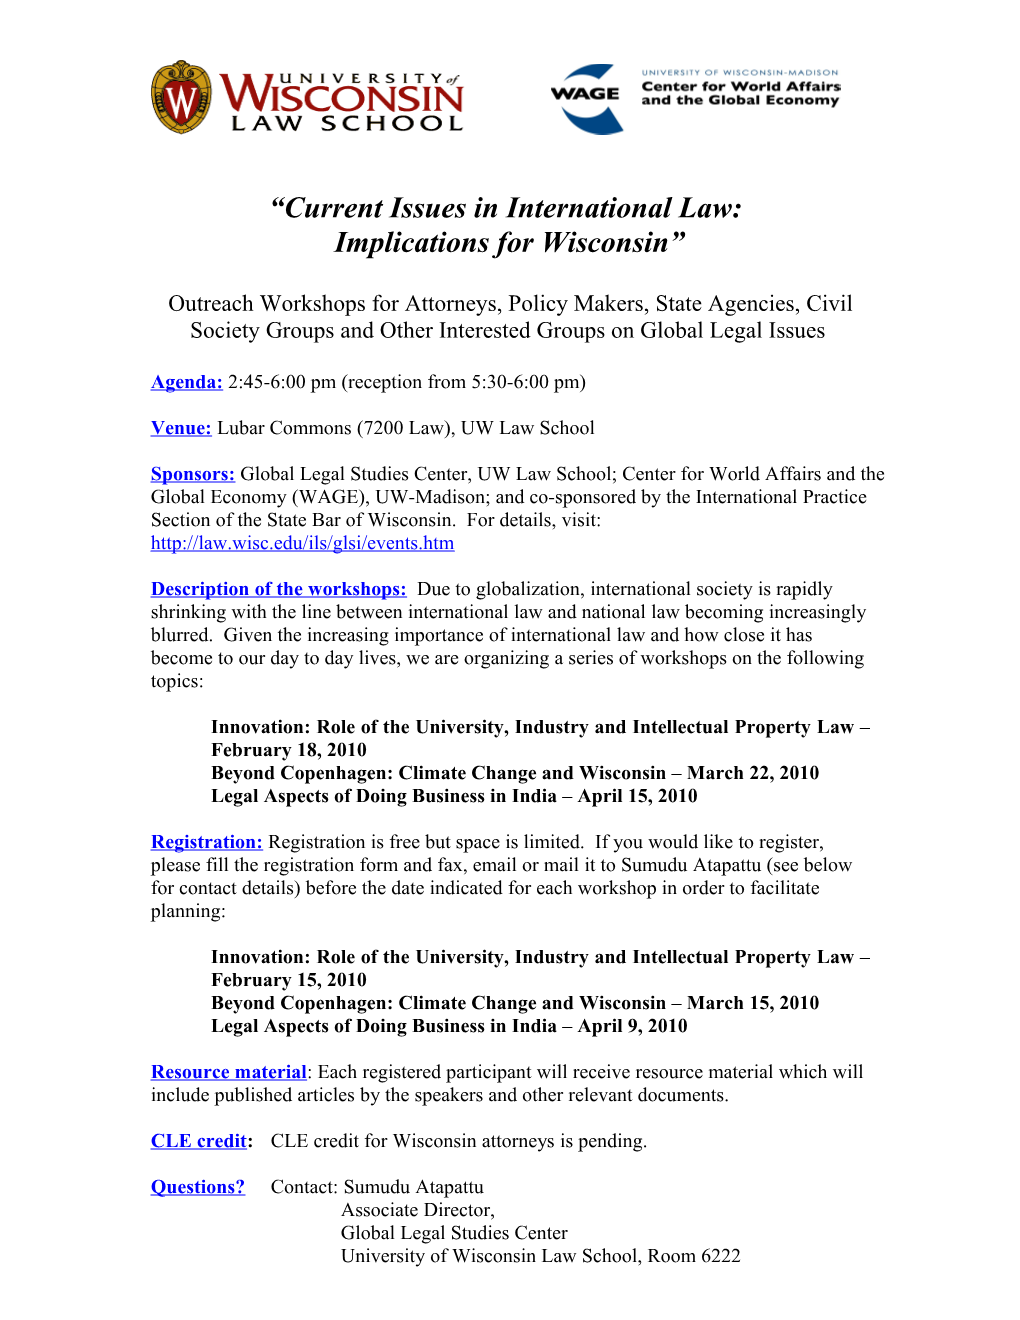 Current Issues in International Law